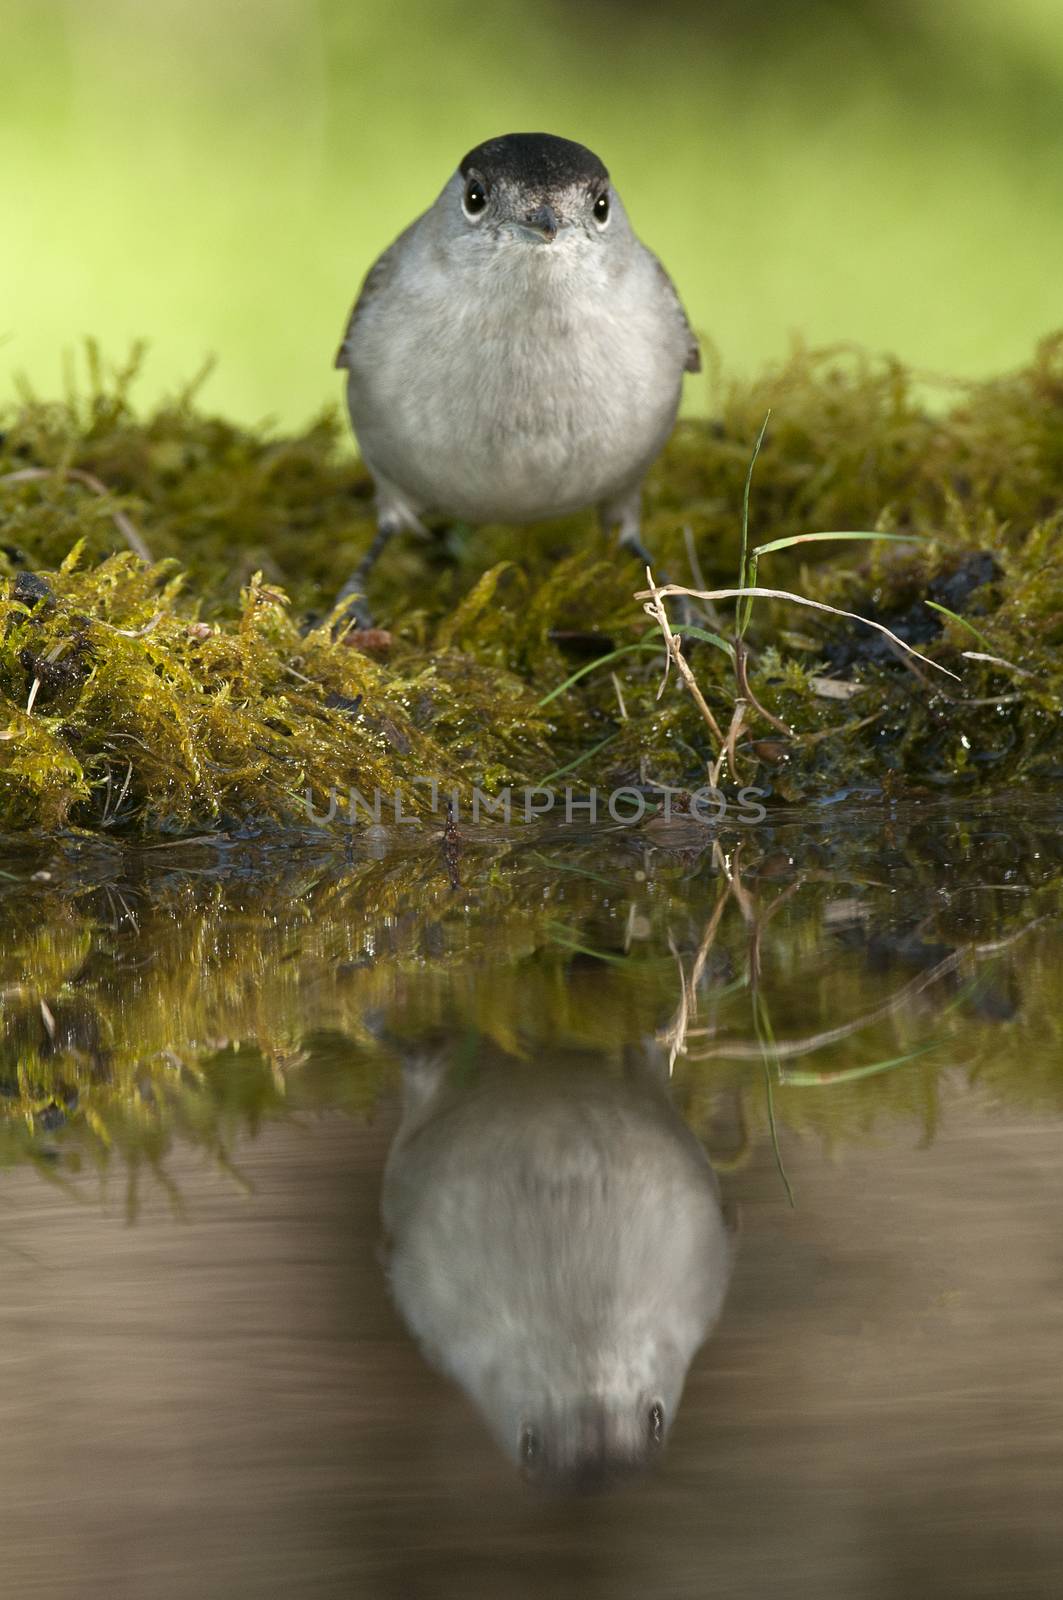 Blackcap (Sylvia atricapilla), in a drinking fountain, drinking water with its reflection